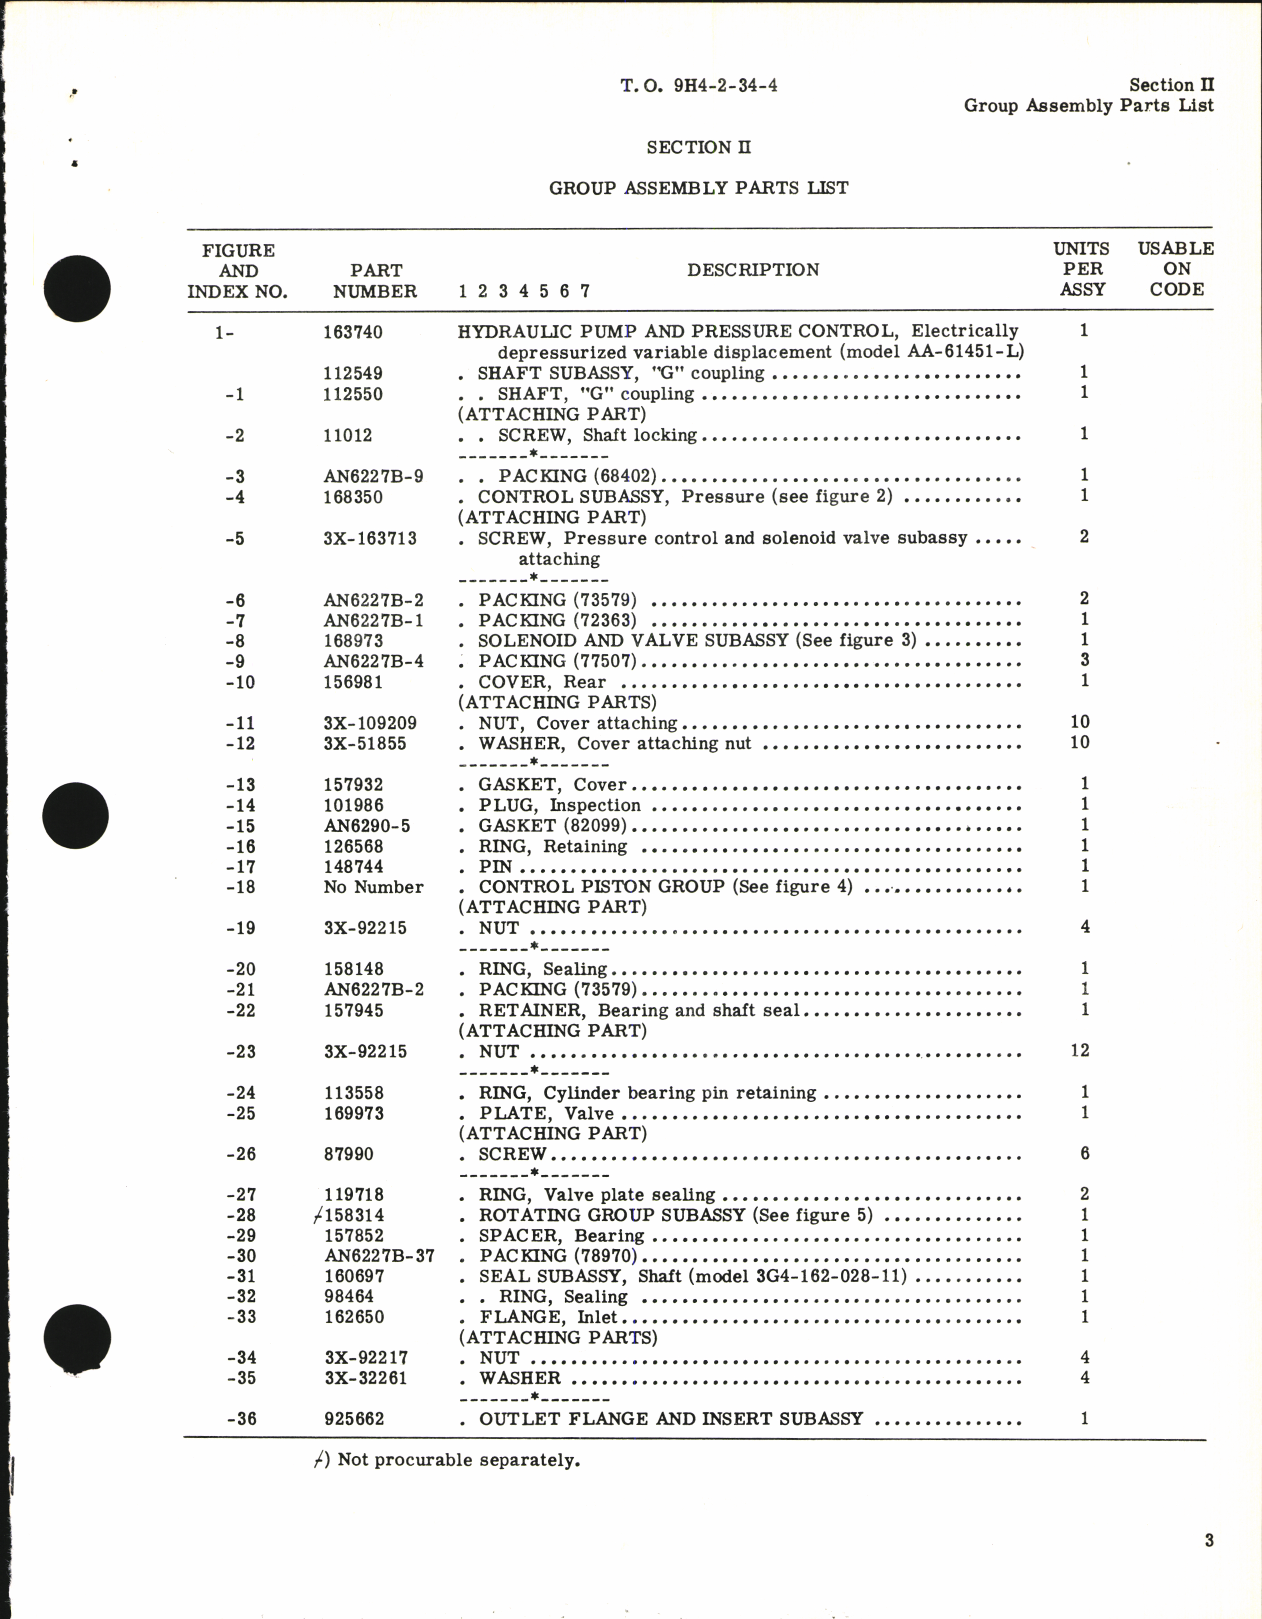 Sample page 5 from AirCorps Library document: Illustrated Parts Breakdown for Electrically Depressurized Variable Displacement Hydraulic Pumps AA-61450 Series